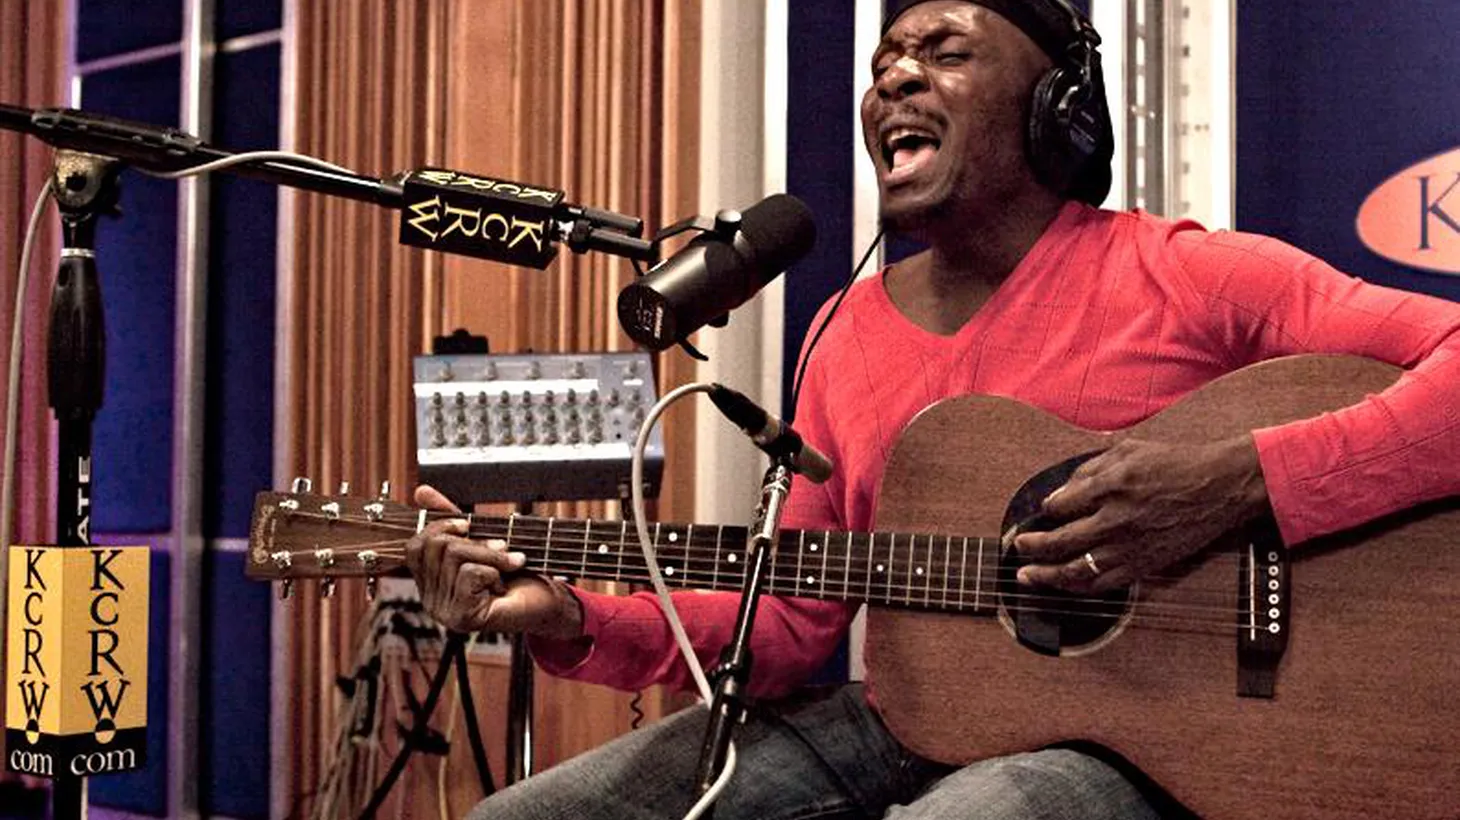 Reggae legend Jimmy Cliff joins us for an intimate performance...